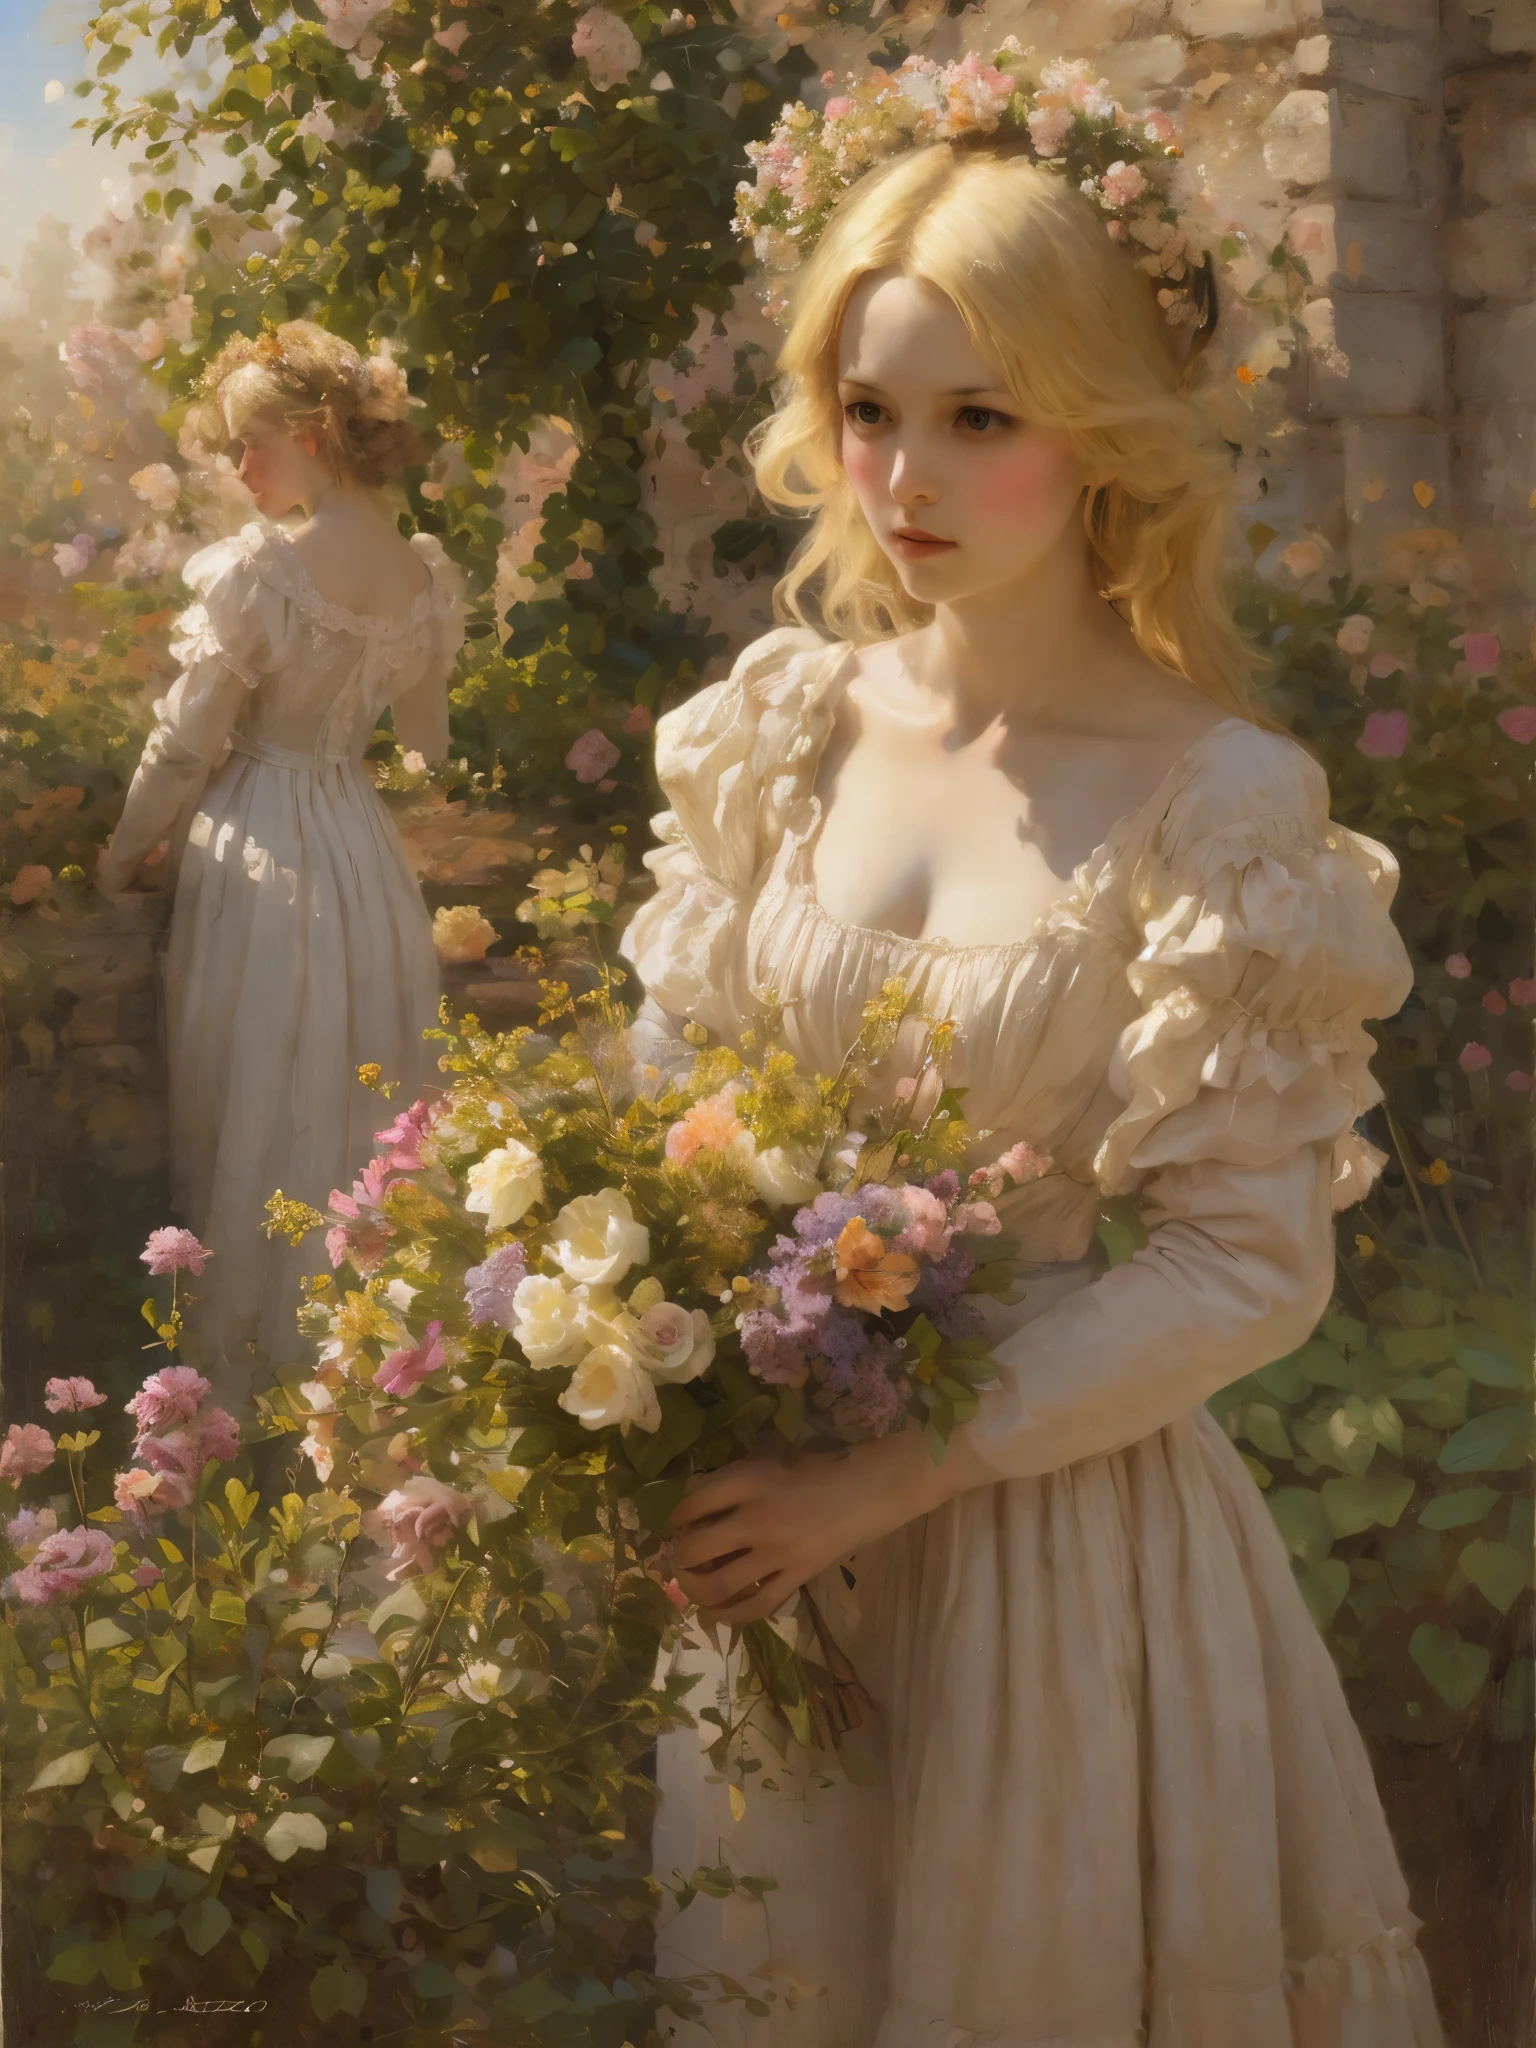 Nydia Lozano（Nydia Lozano）Art style。Europe 19th century，in the sun，European lady in the garden，Detailed hands，portrait。blond hair。Artistic creation：1.37.Natural soft light，Describe the charm and beauty of light and shadow。